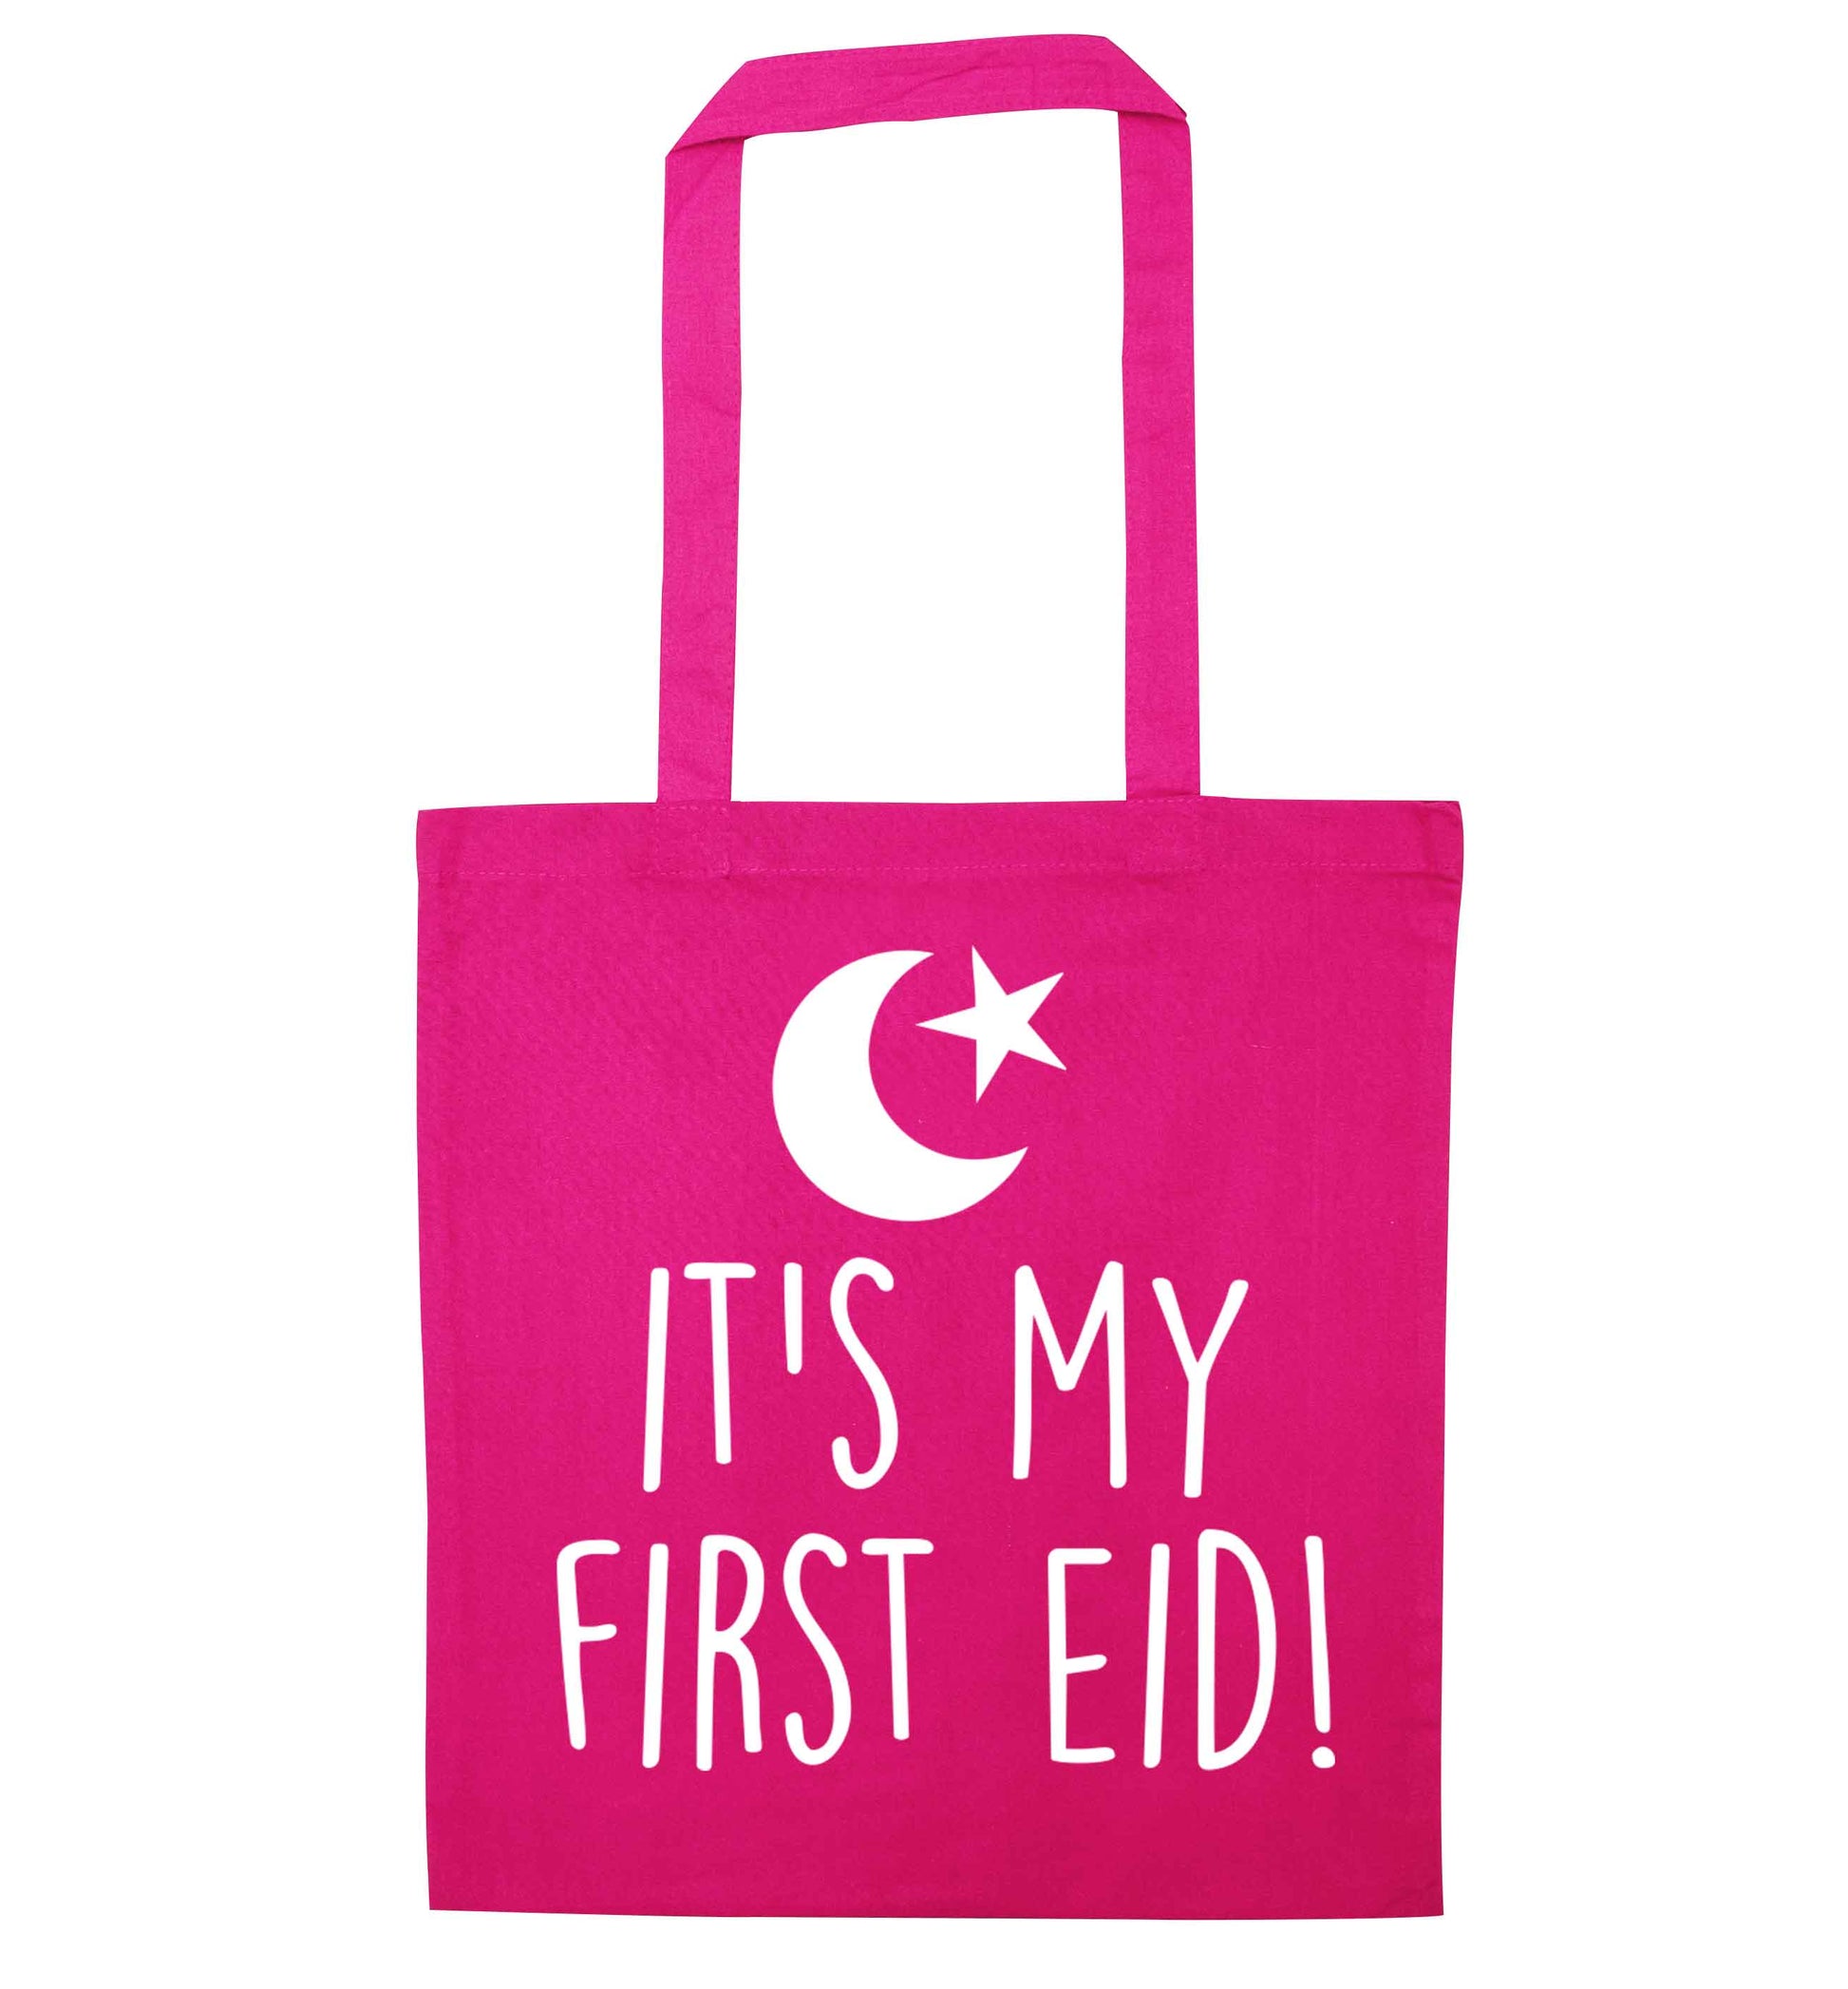 It's my first Eid pink tote bag